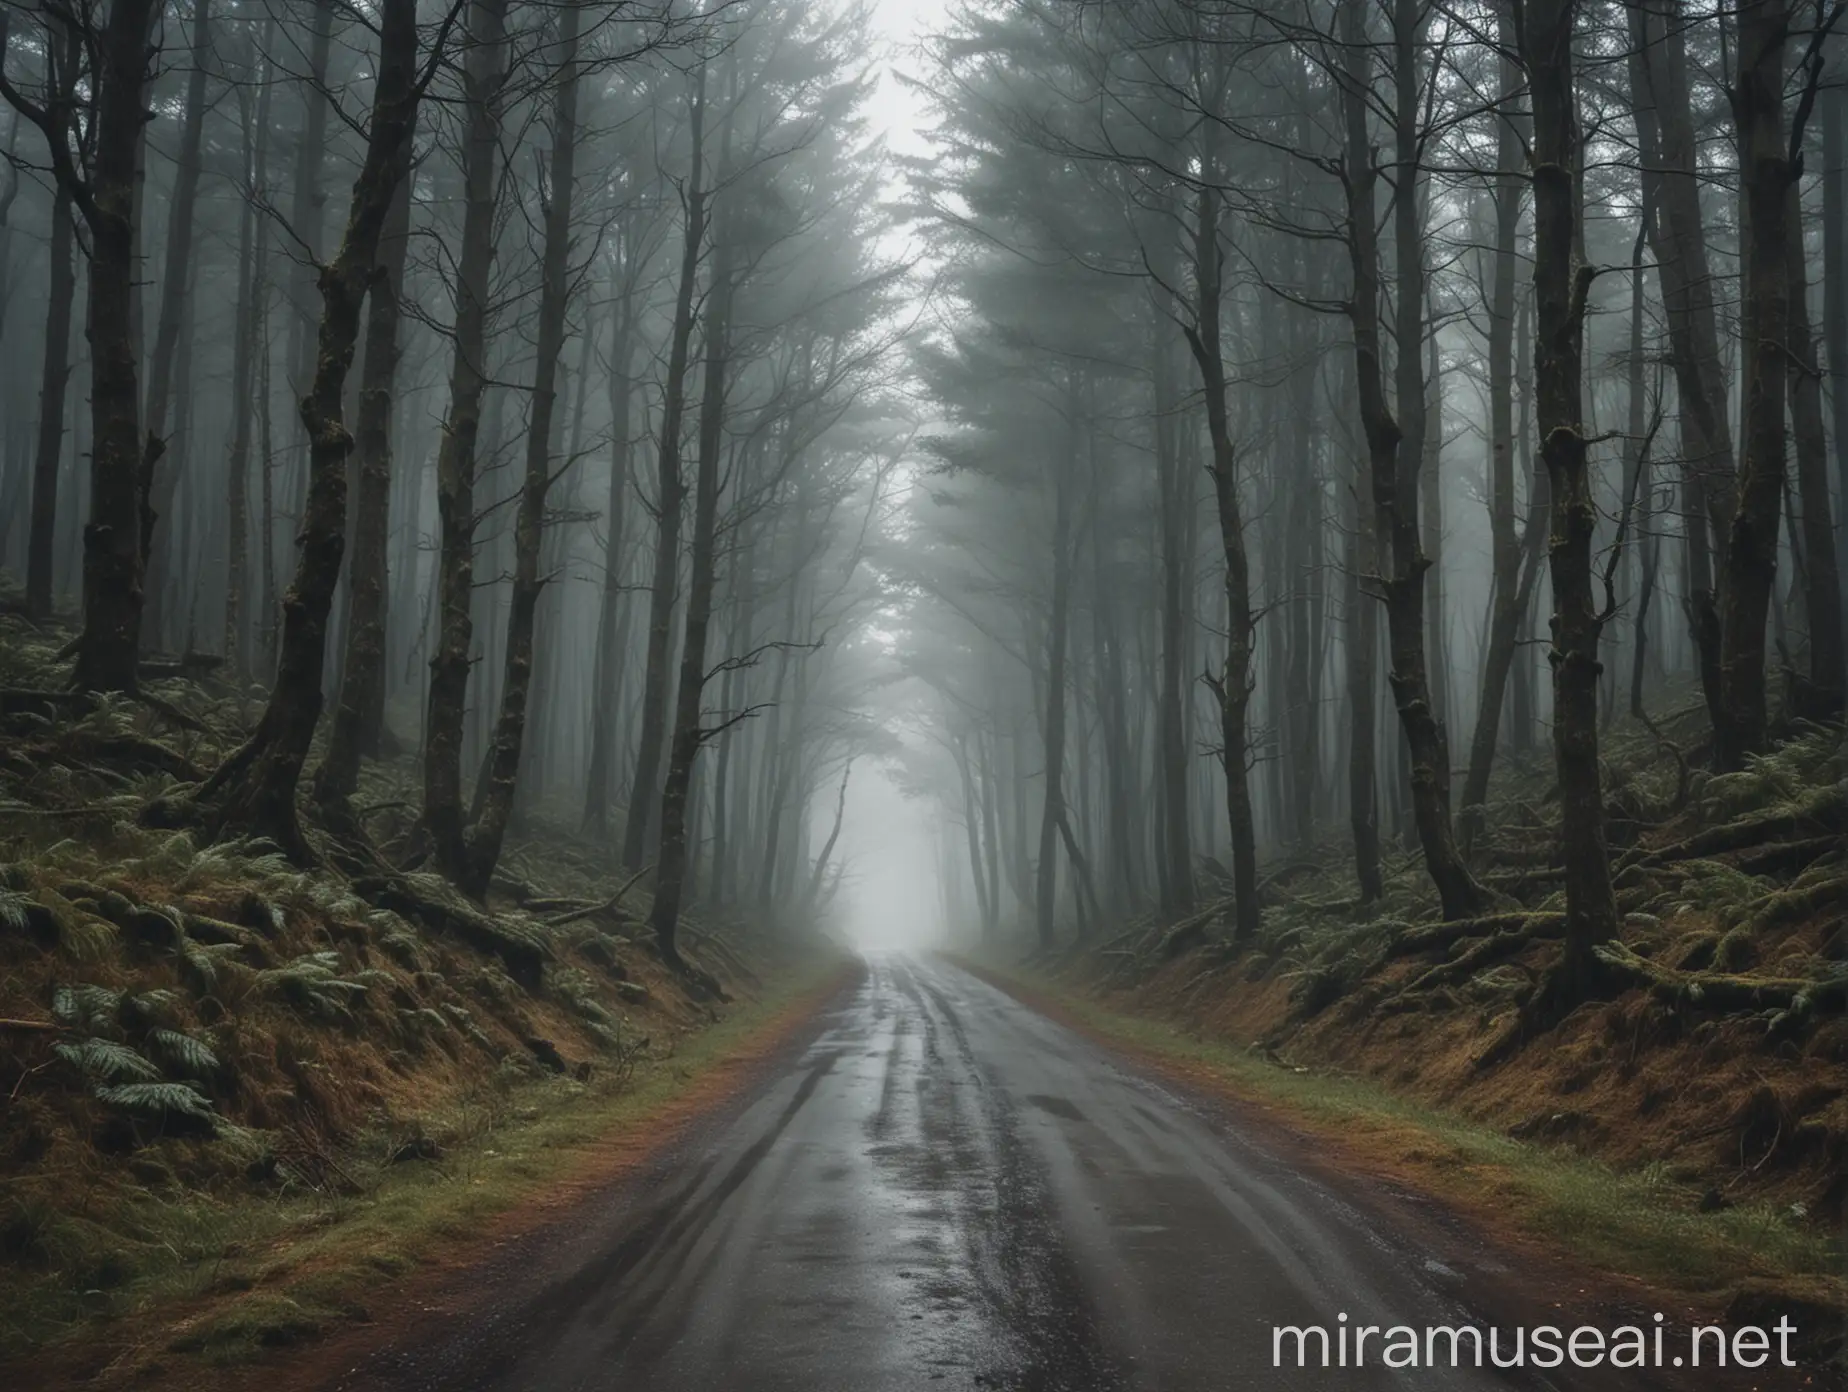 small road in the gloomy forest